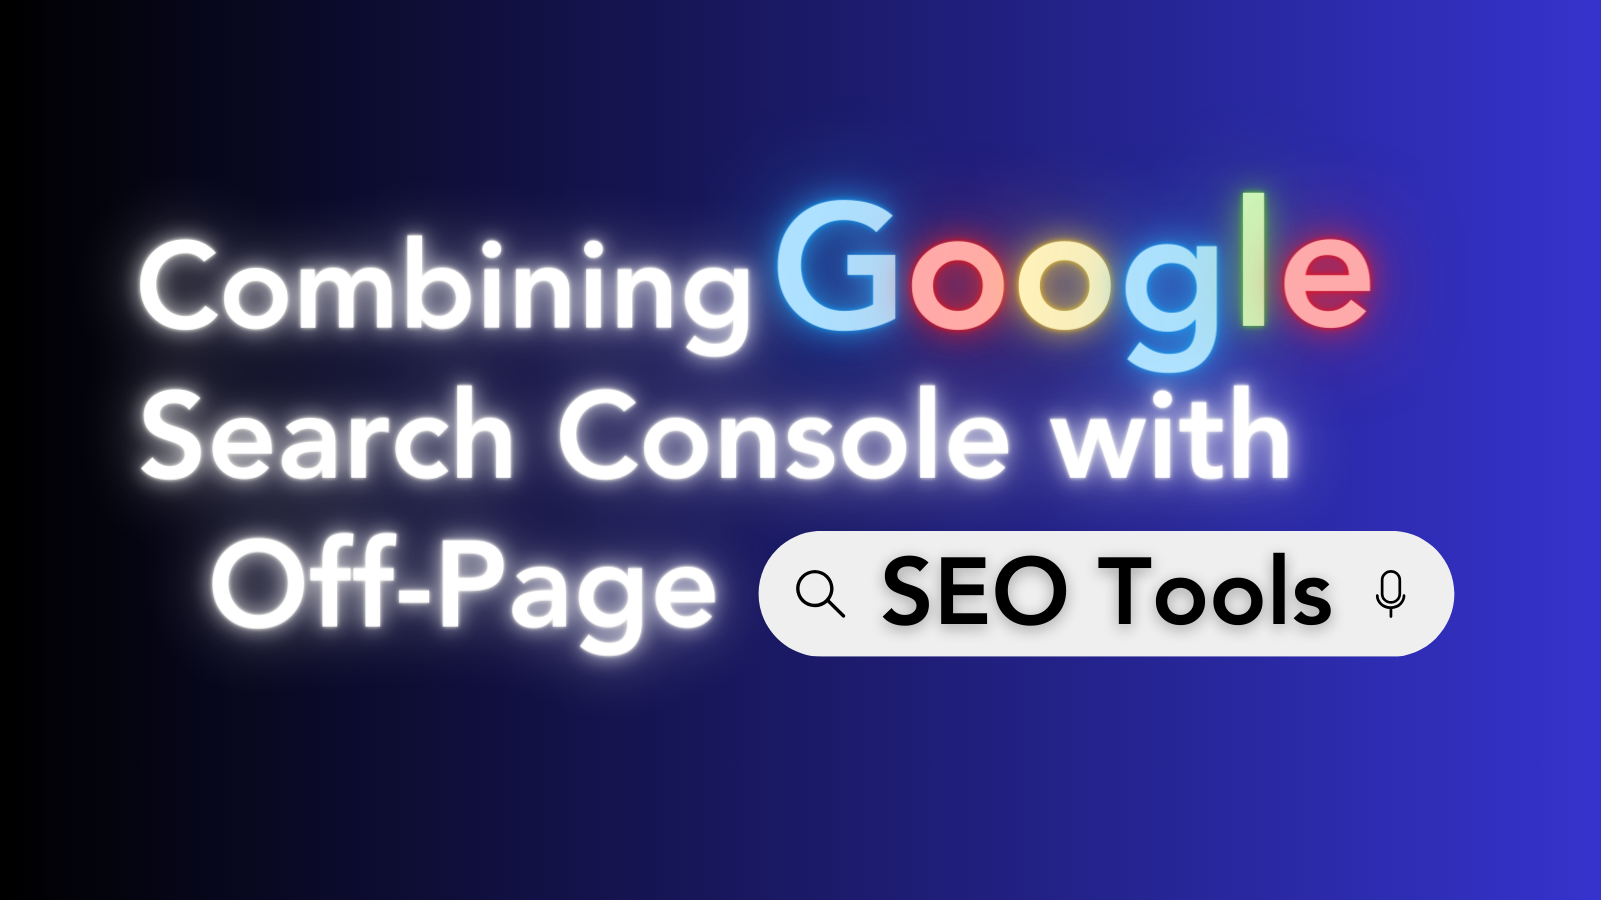 Combining Google Search Console with Off-Page SEO Tools